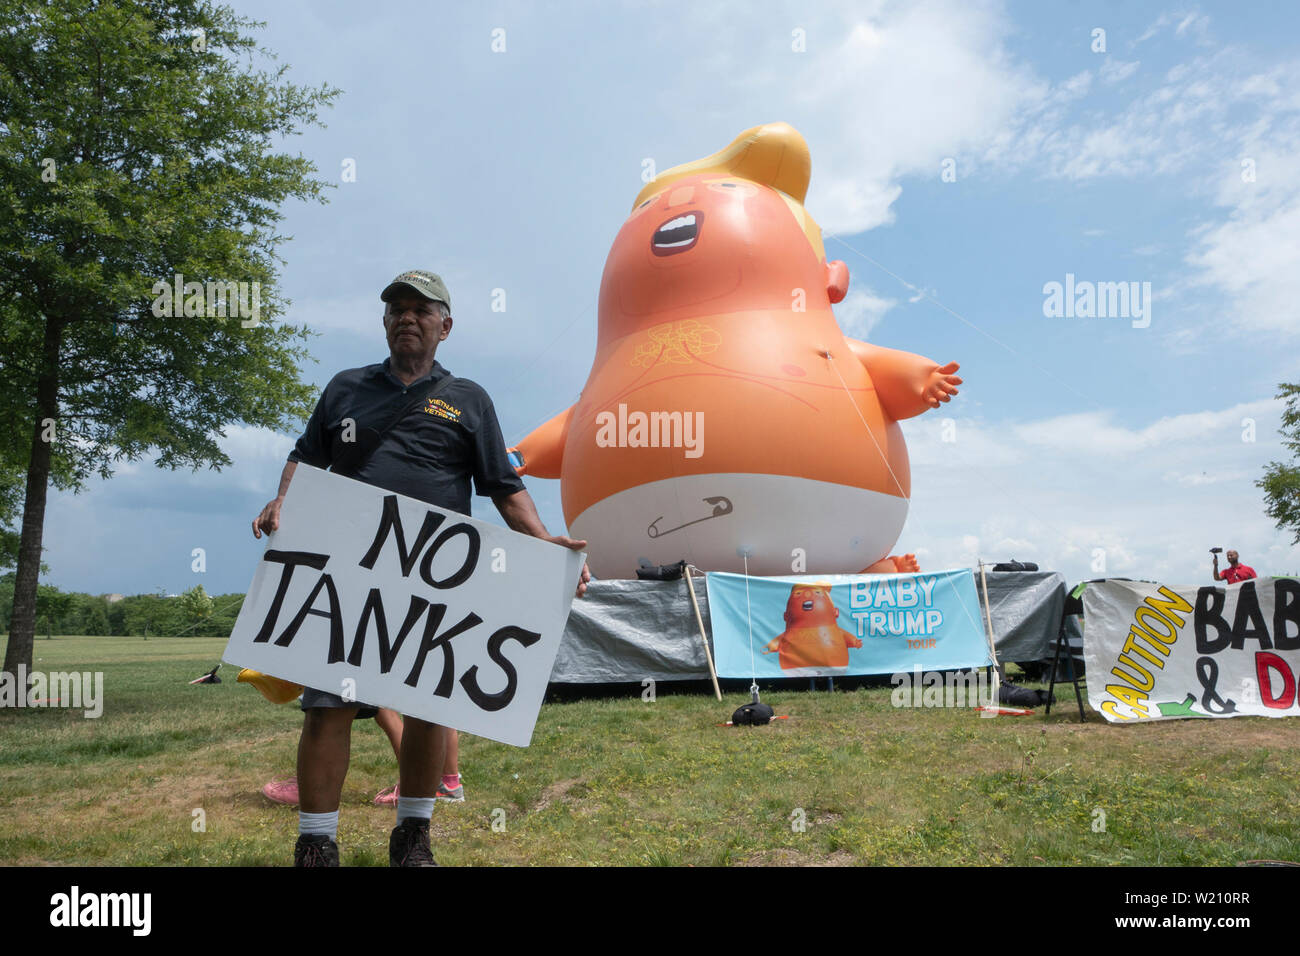 Lucio Camacho holds a sign reading “No Tanks” in front of the “Baby Trump” blimp in Washington, DC, U.S. on July 4, 2019, to protest United States President Donald J. Trump's Salute to America speech. The group believes the president's participation in 4th of July celebrations is politicizing a non-political holiday. Credit: Stefani Reynolds/CNP/MediaPunch Stock Photo